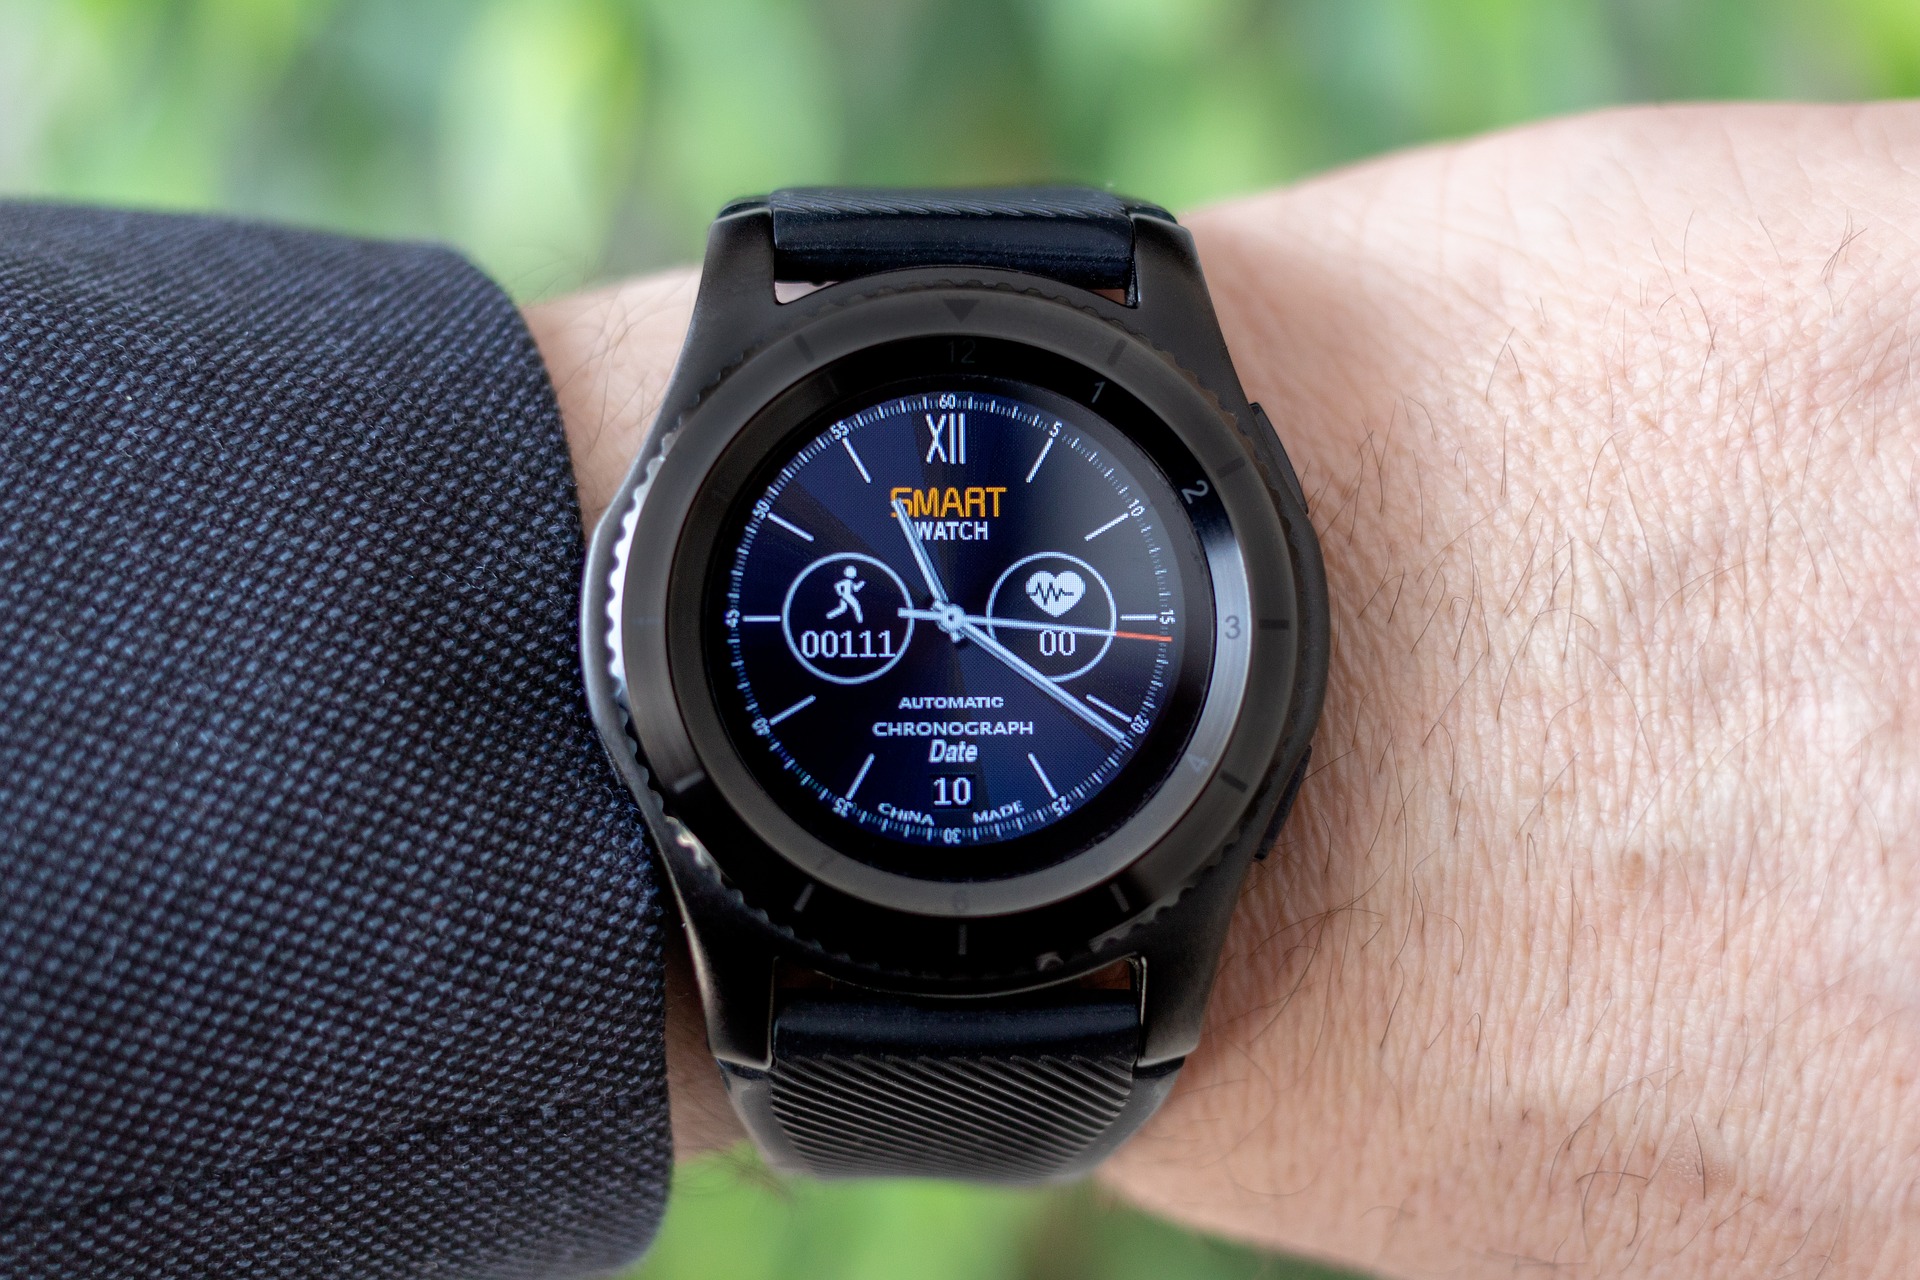 wear os compatible watches